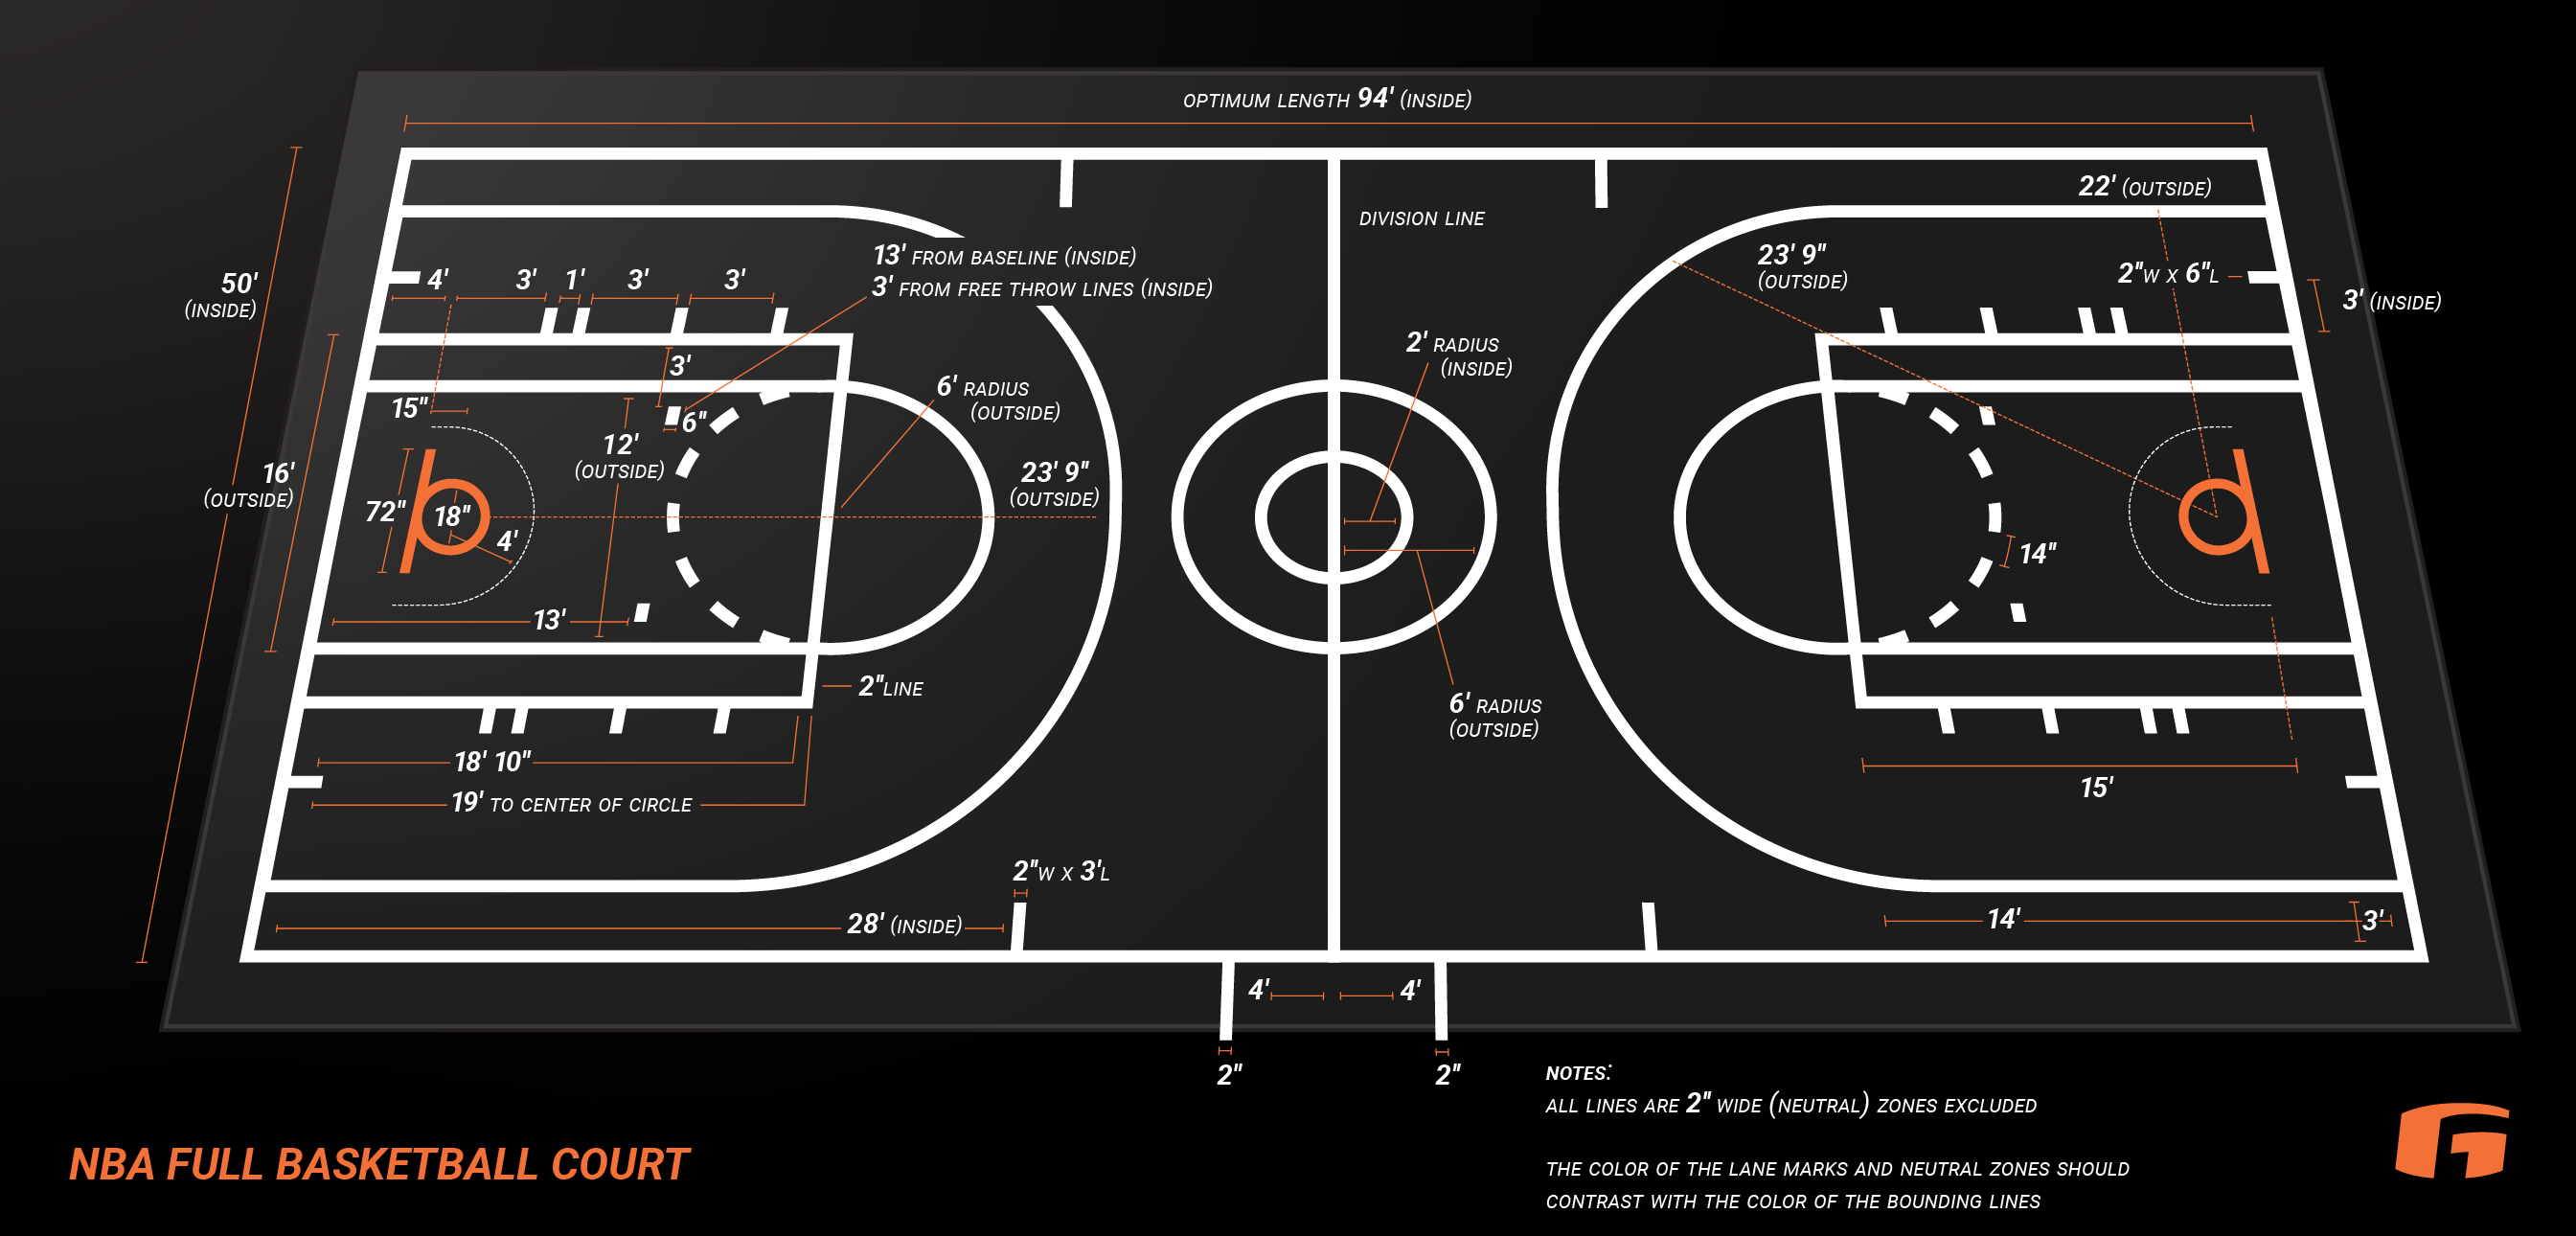 basketball court measurements - size of basketball court dimension - nba full basketball dimensions - 